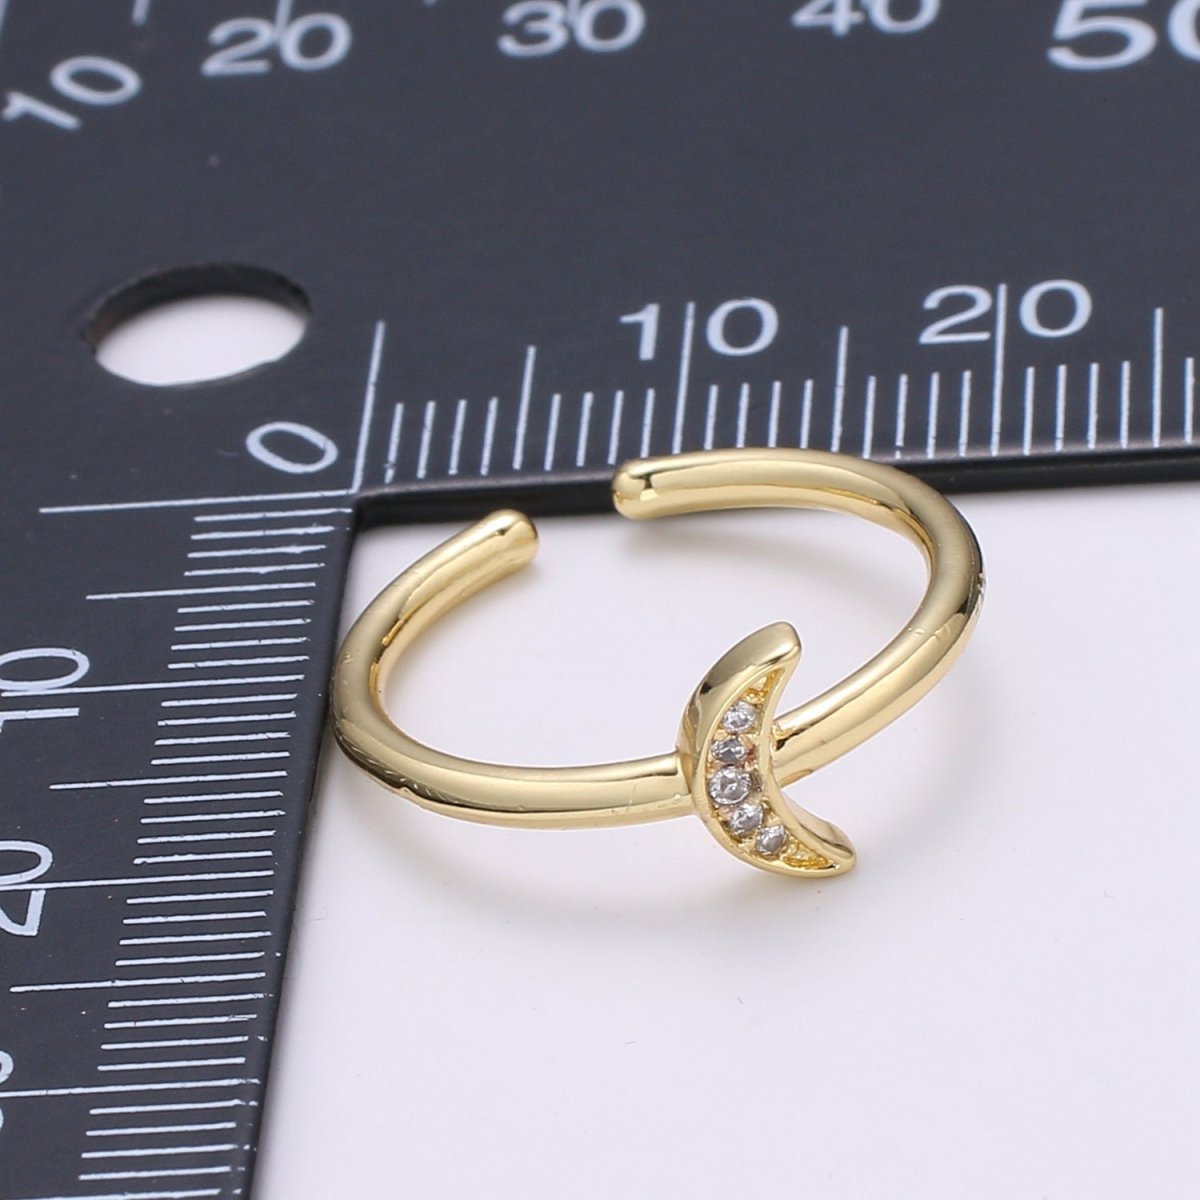 1pc Cresent Moon CZ 24k Gold Ring, Moon Cubic Pave Adjustable Gold Curb Ring, Simple Ring, Clear Cubic Zirconia R316 - DLUXCA